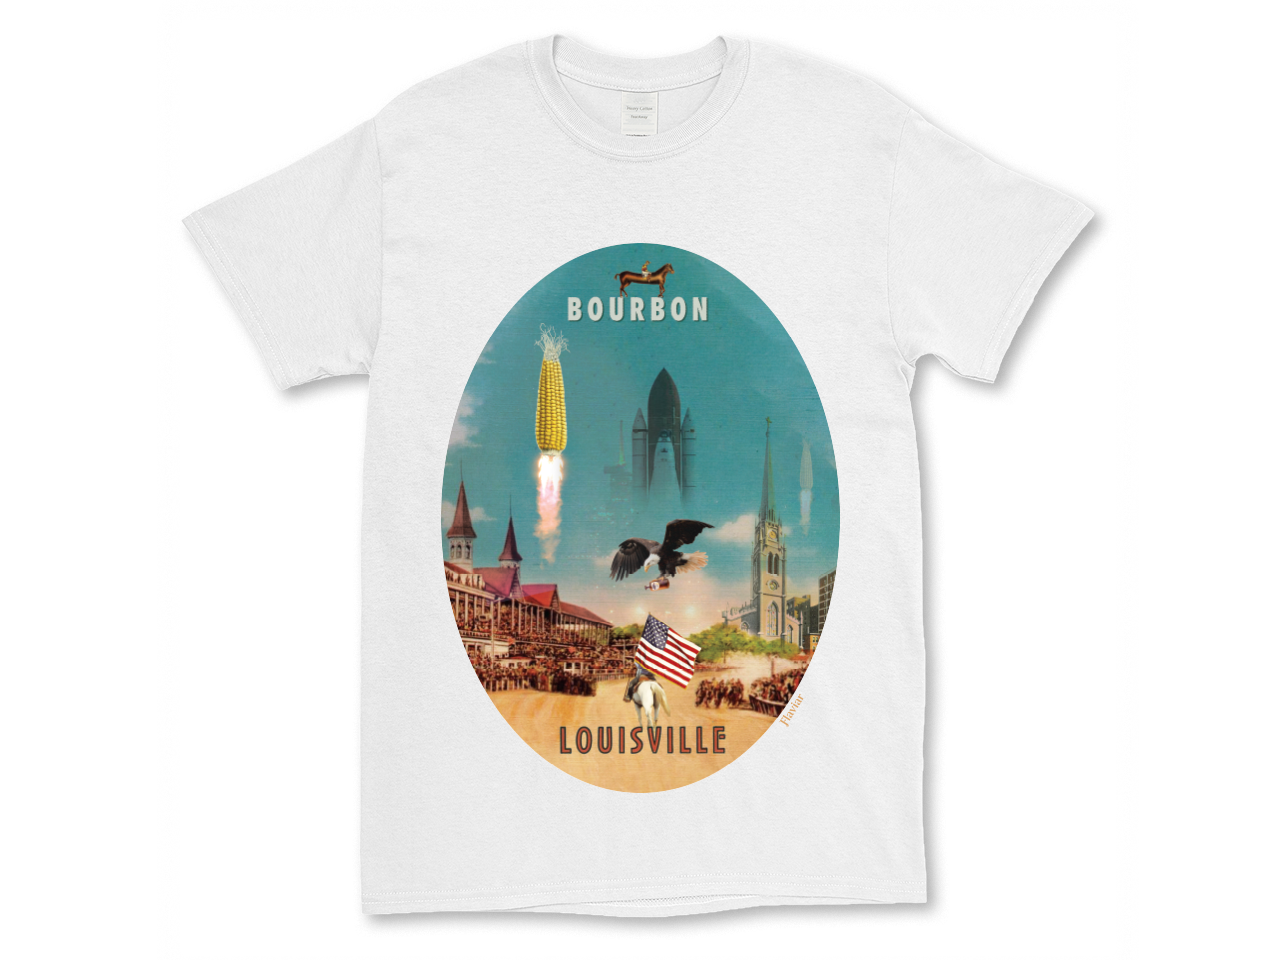 Carousel collection T-shirt - Louisville (Male - M)